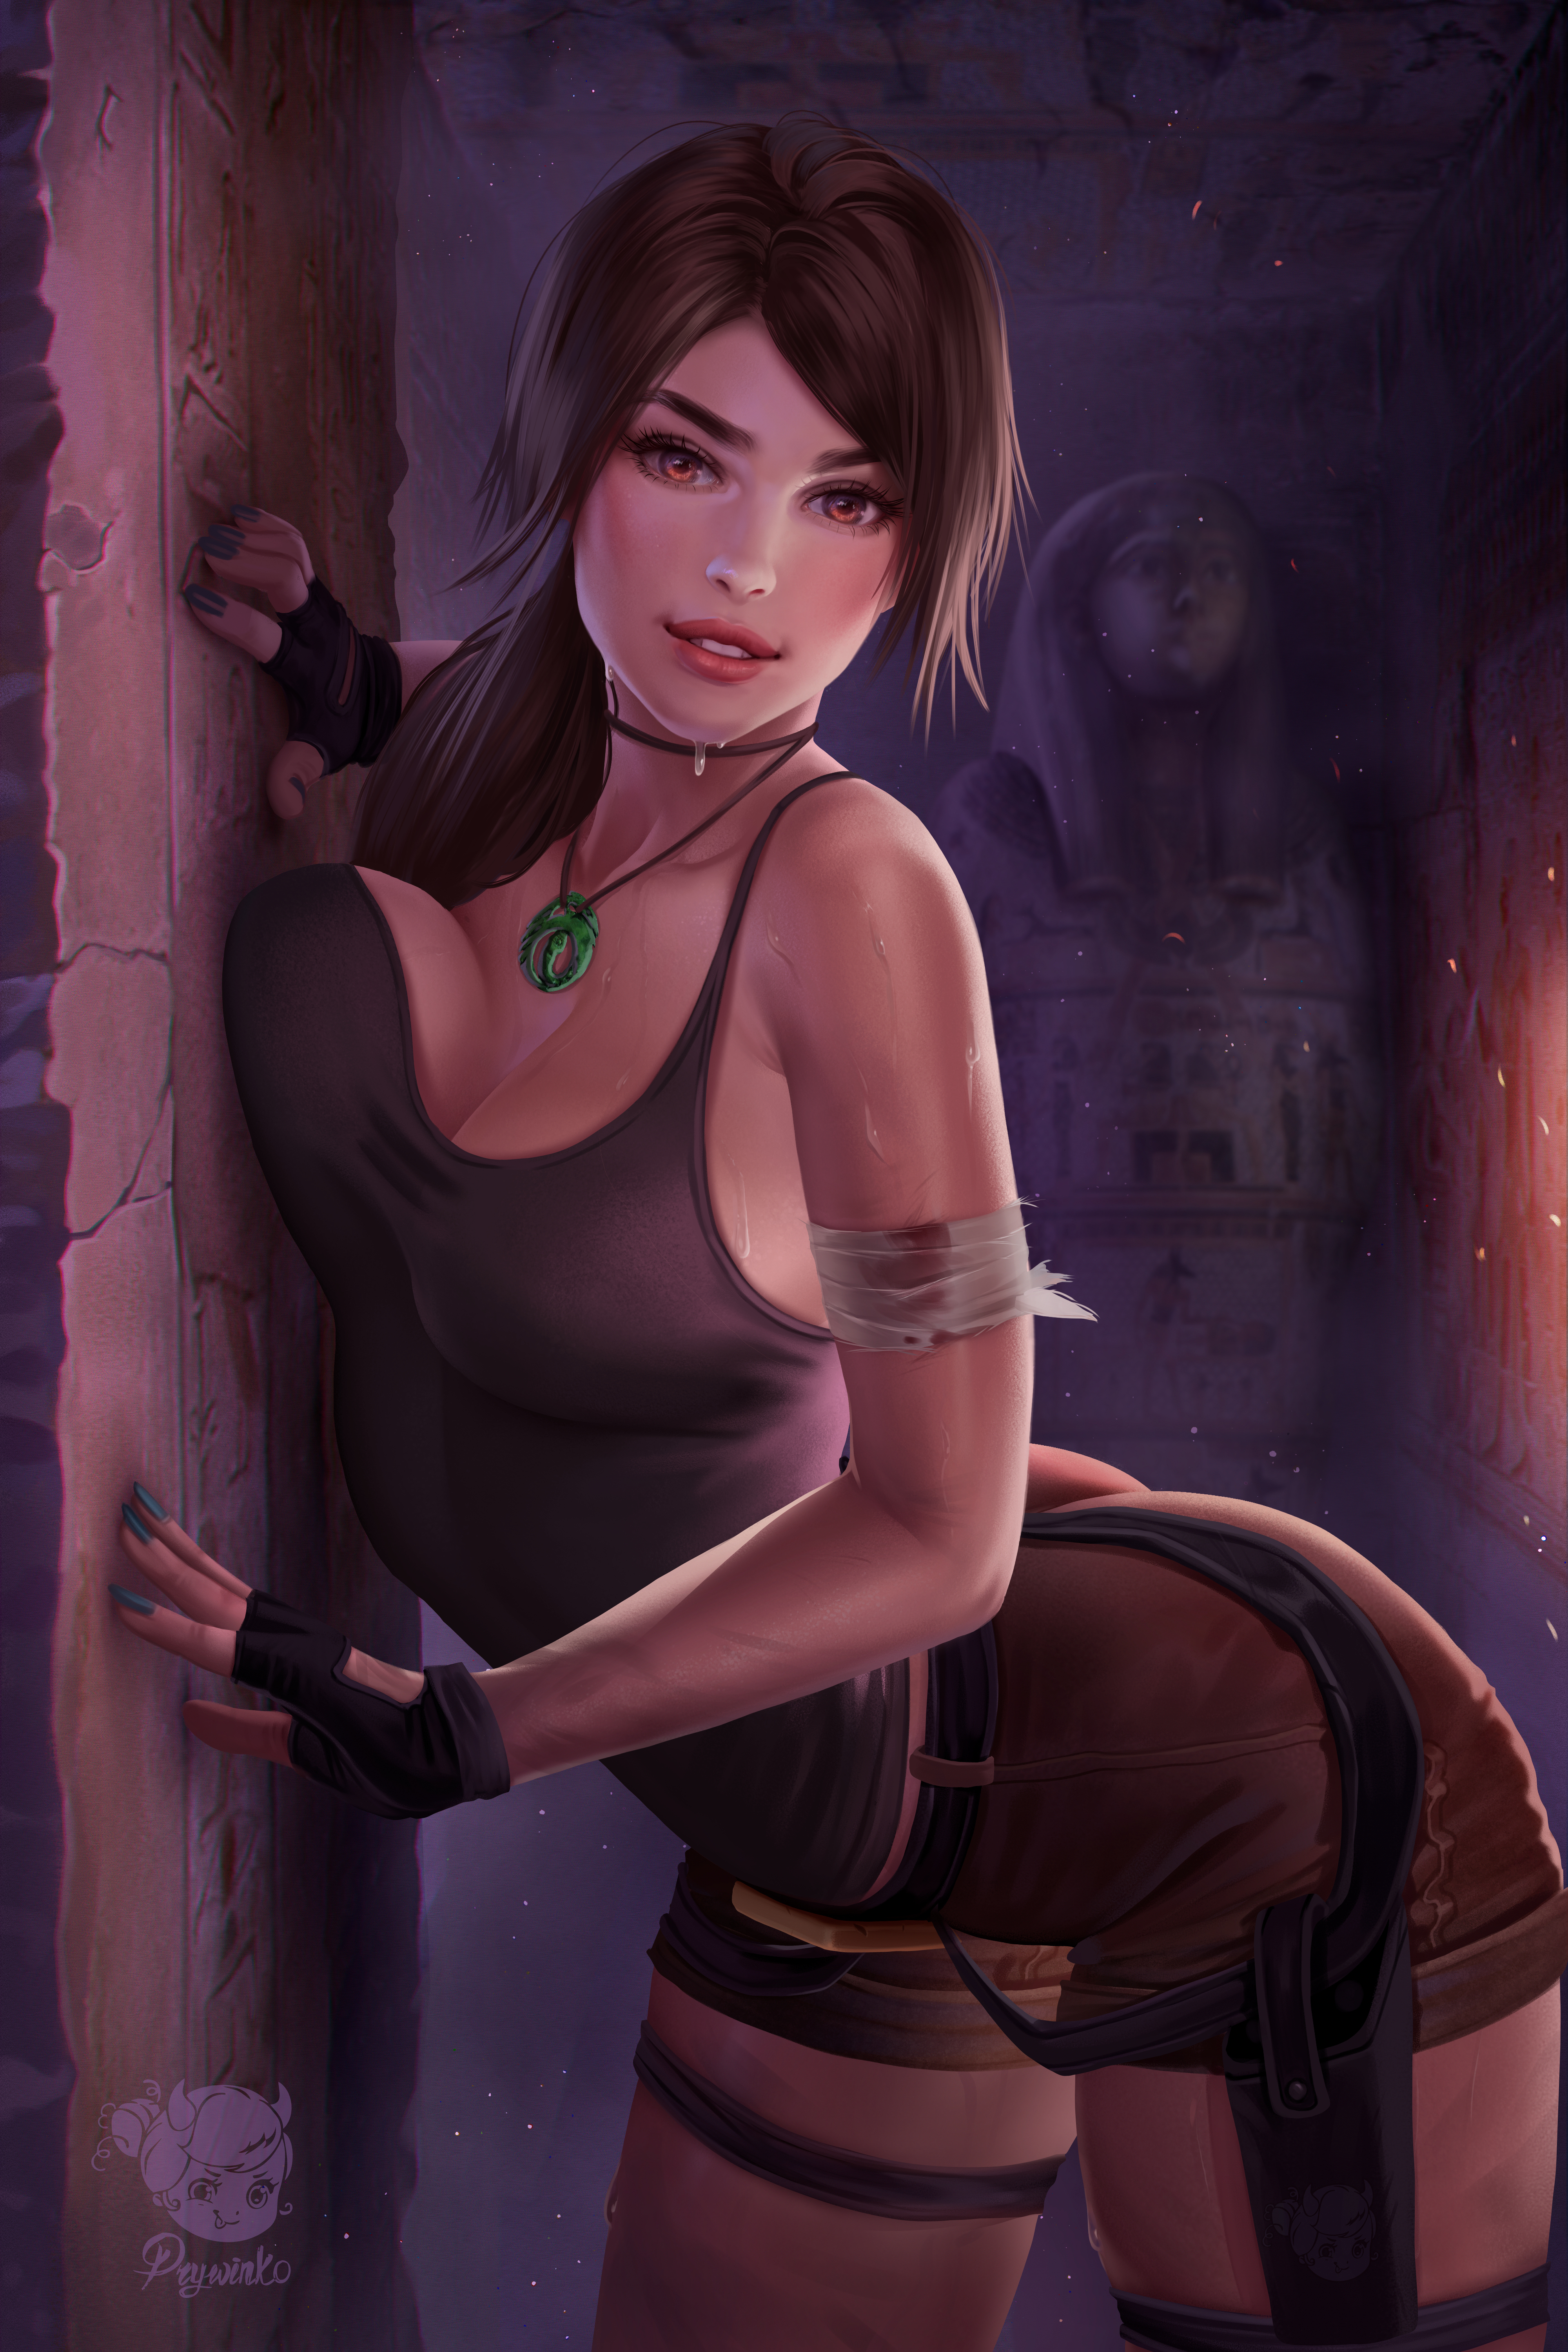 General 4000x6000 Lara Croft (Tomb Raider) Tomb Raider video games video game girls ponytail brunette necklace sweat wet body tank top cleavage short shorts curvy arched back 2D artwork drawing fan art Prywinko pressed boobs